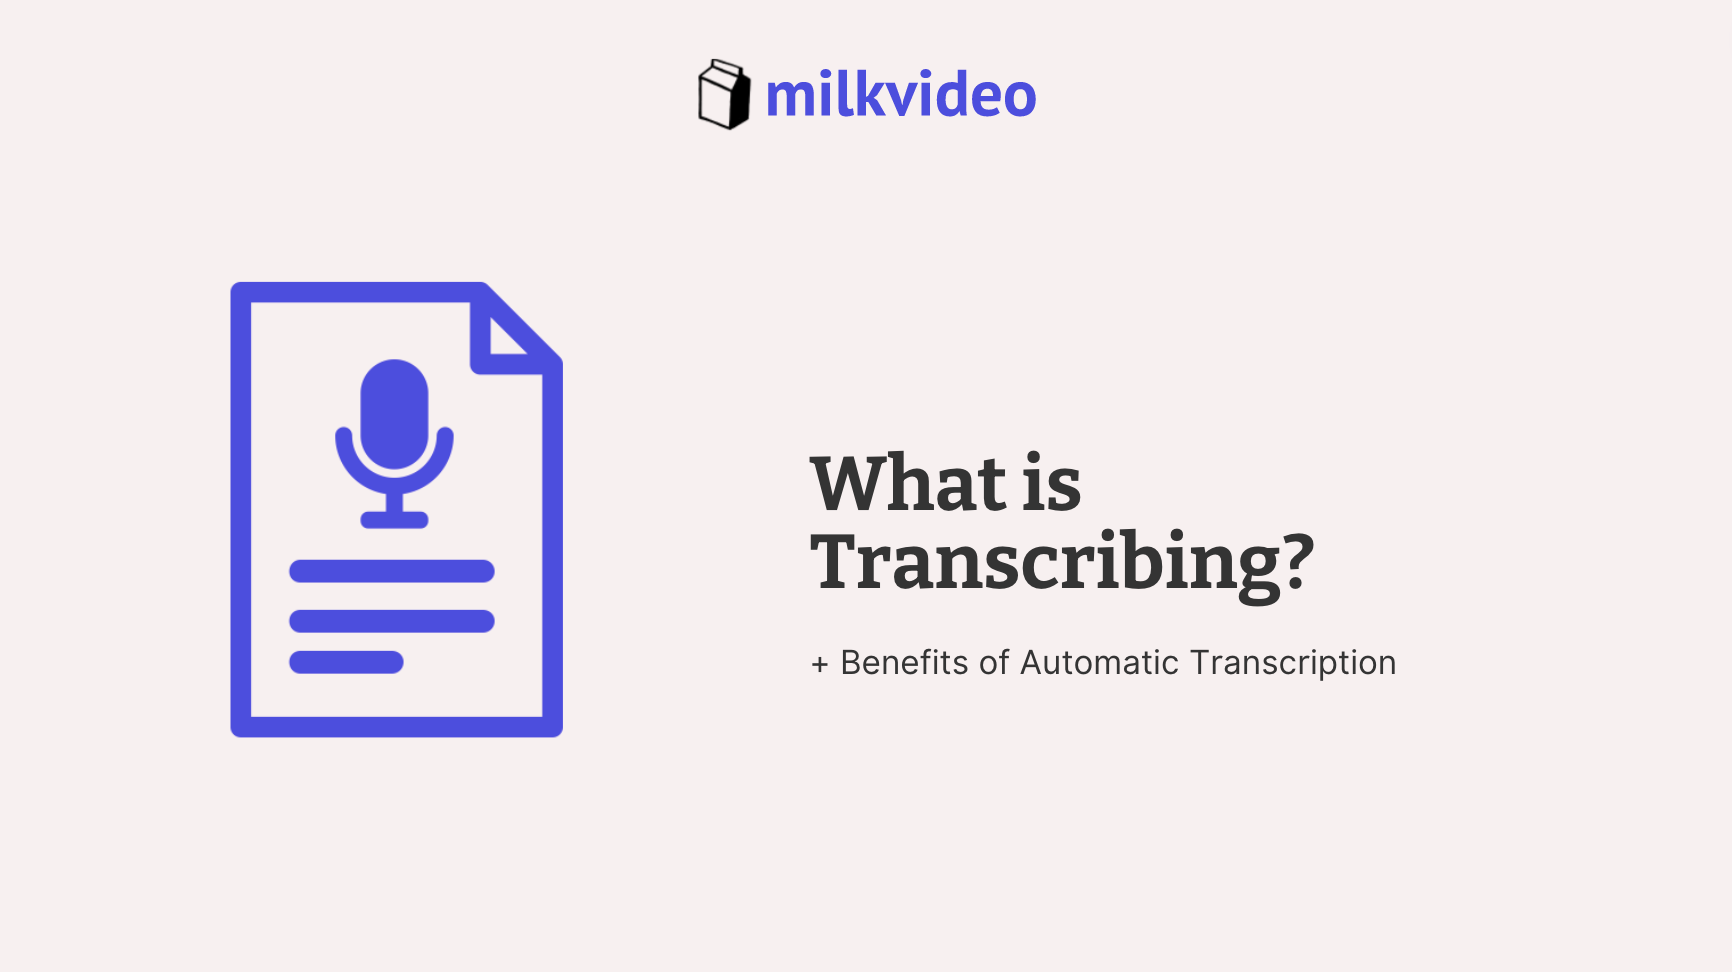 What is Transcribing?